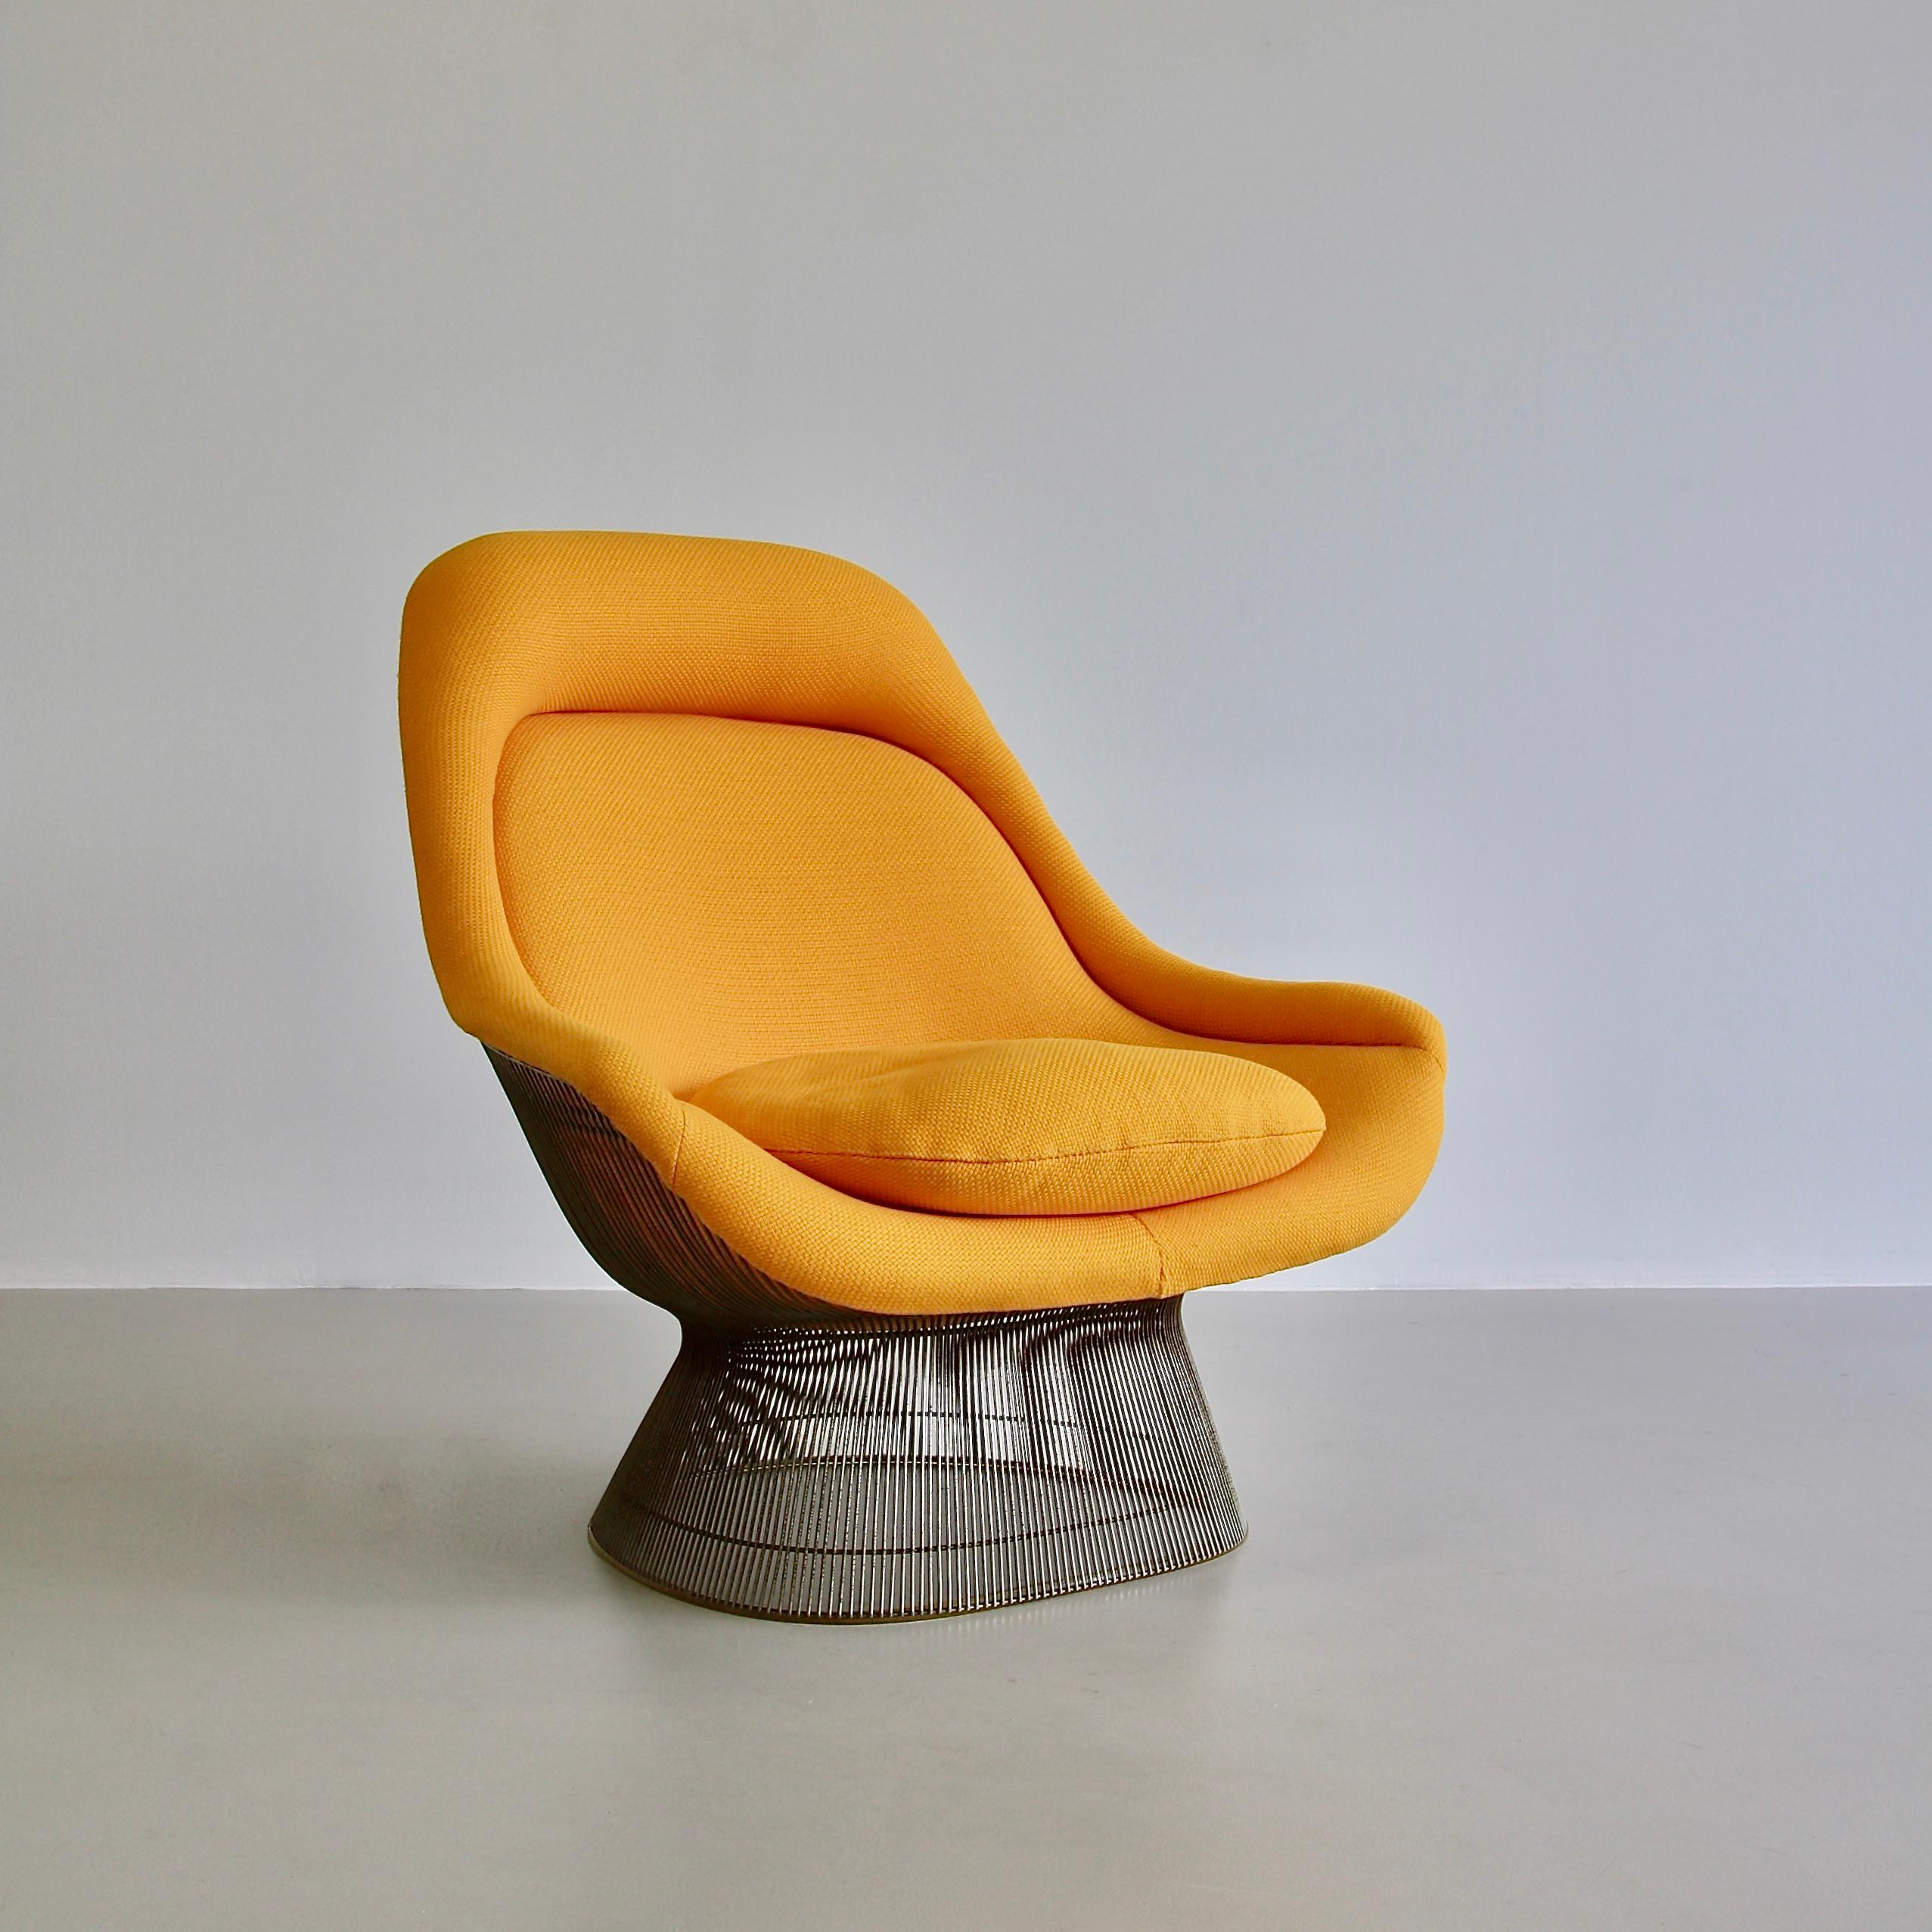 VINTAGE Easy chair and footstool designed by Warren Platner. U.S.A, Knoll International, 1966.

The lounge chair, model number 1725. Welded curved steel and wool upholstery. Beautiful combination!

Literature: Fiell, Charlotte & Peter. Die Modernen